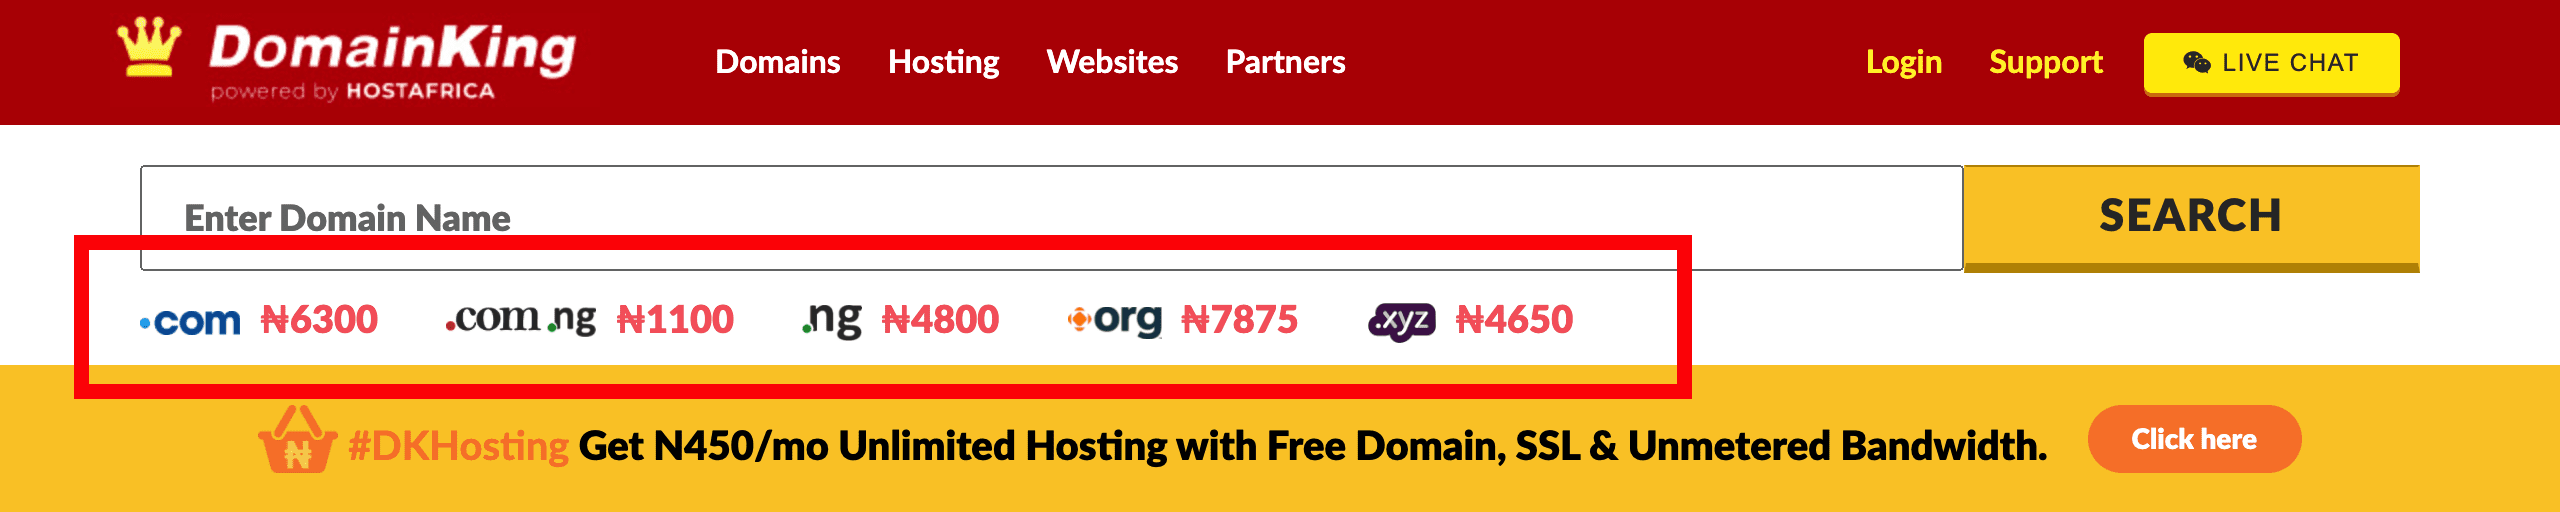 A screenie of the DomainKing Homepage after their updated domain registration pricing following its acquisition by HostAfrica